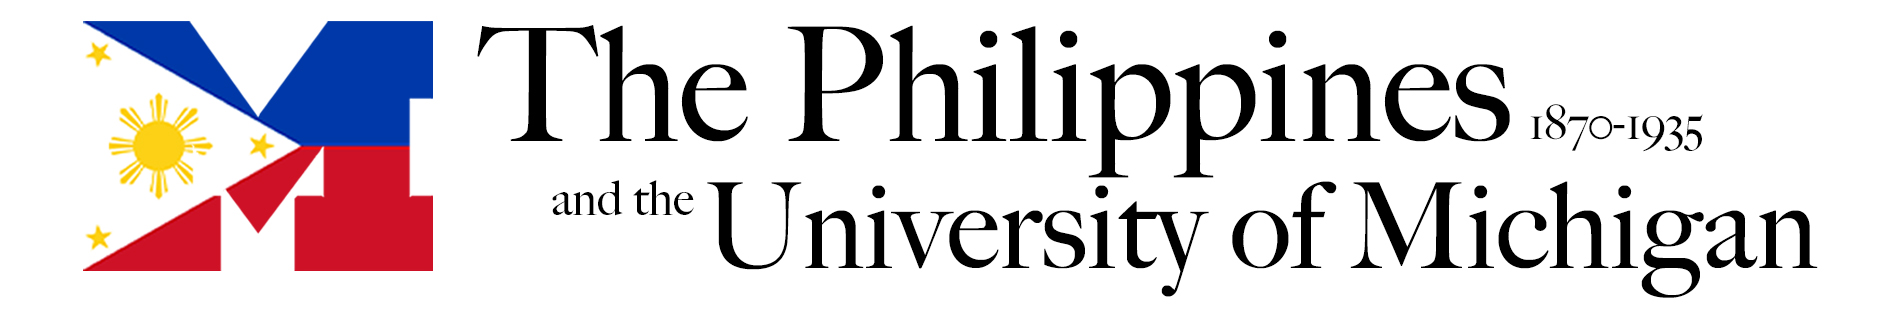 The Philippines and the University of Michigan, 1870-1935